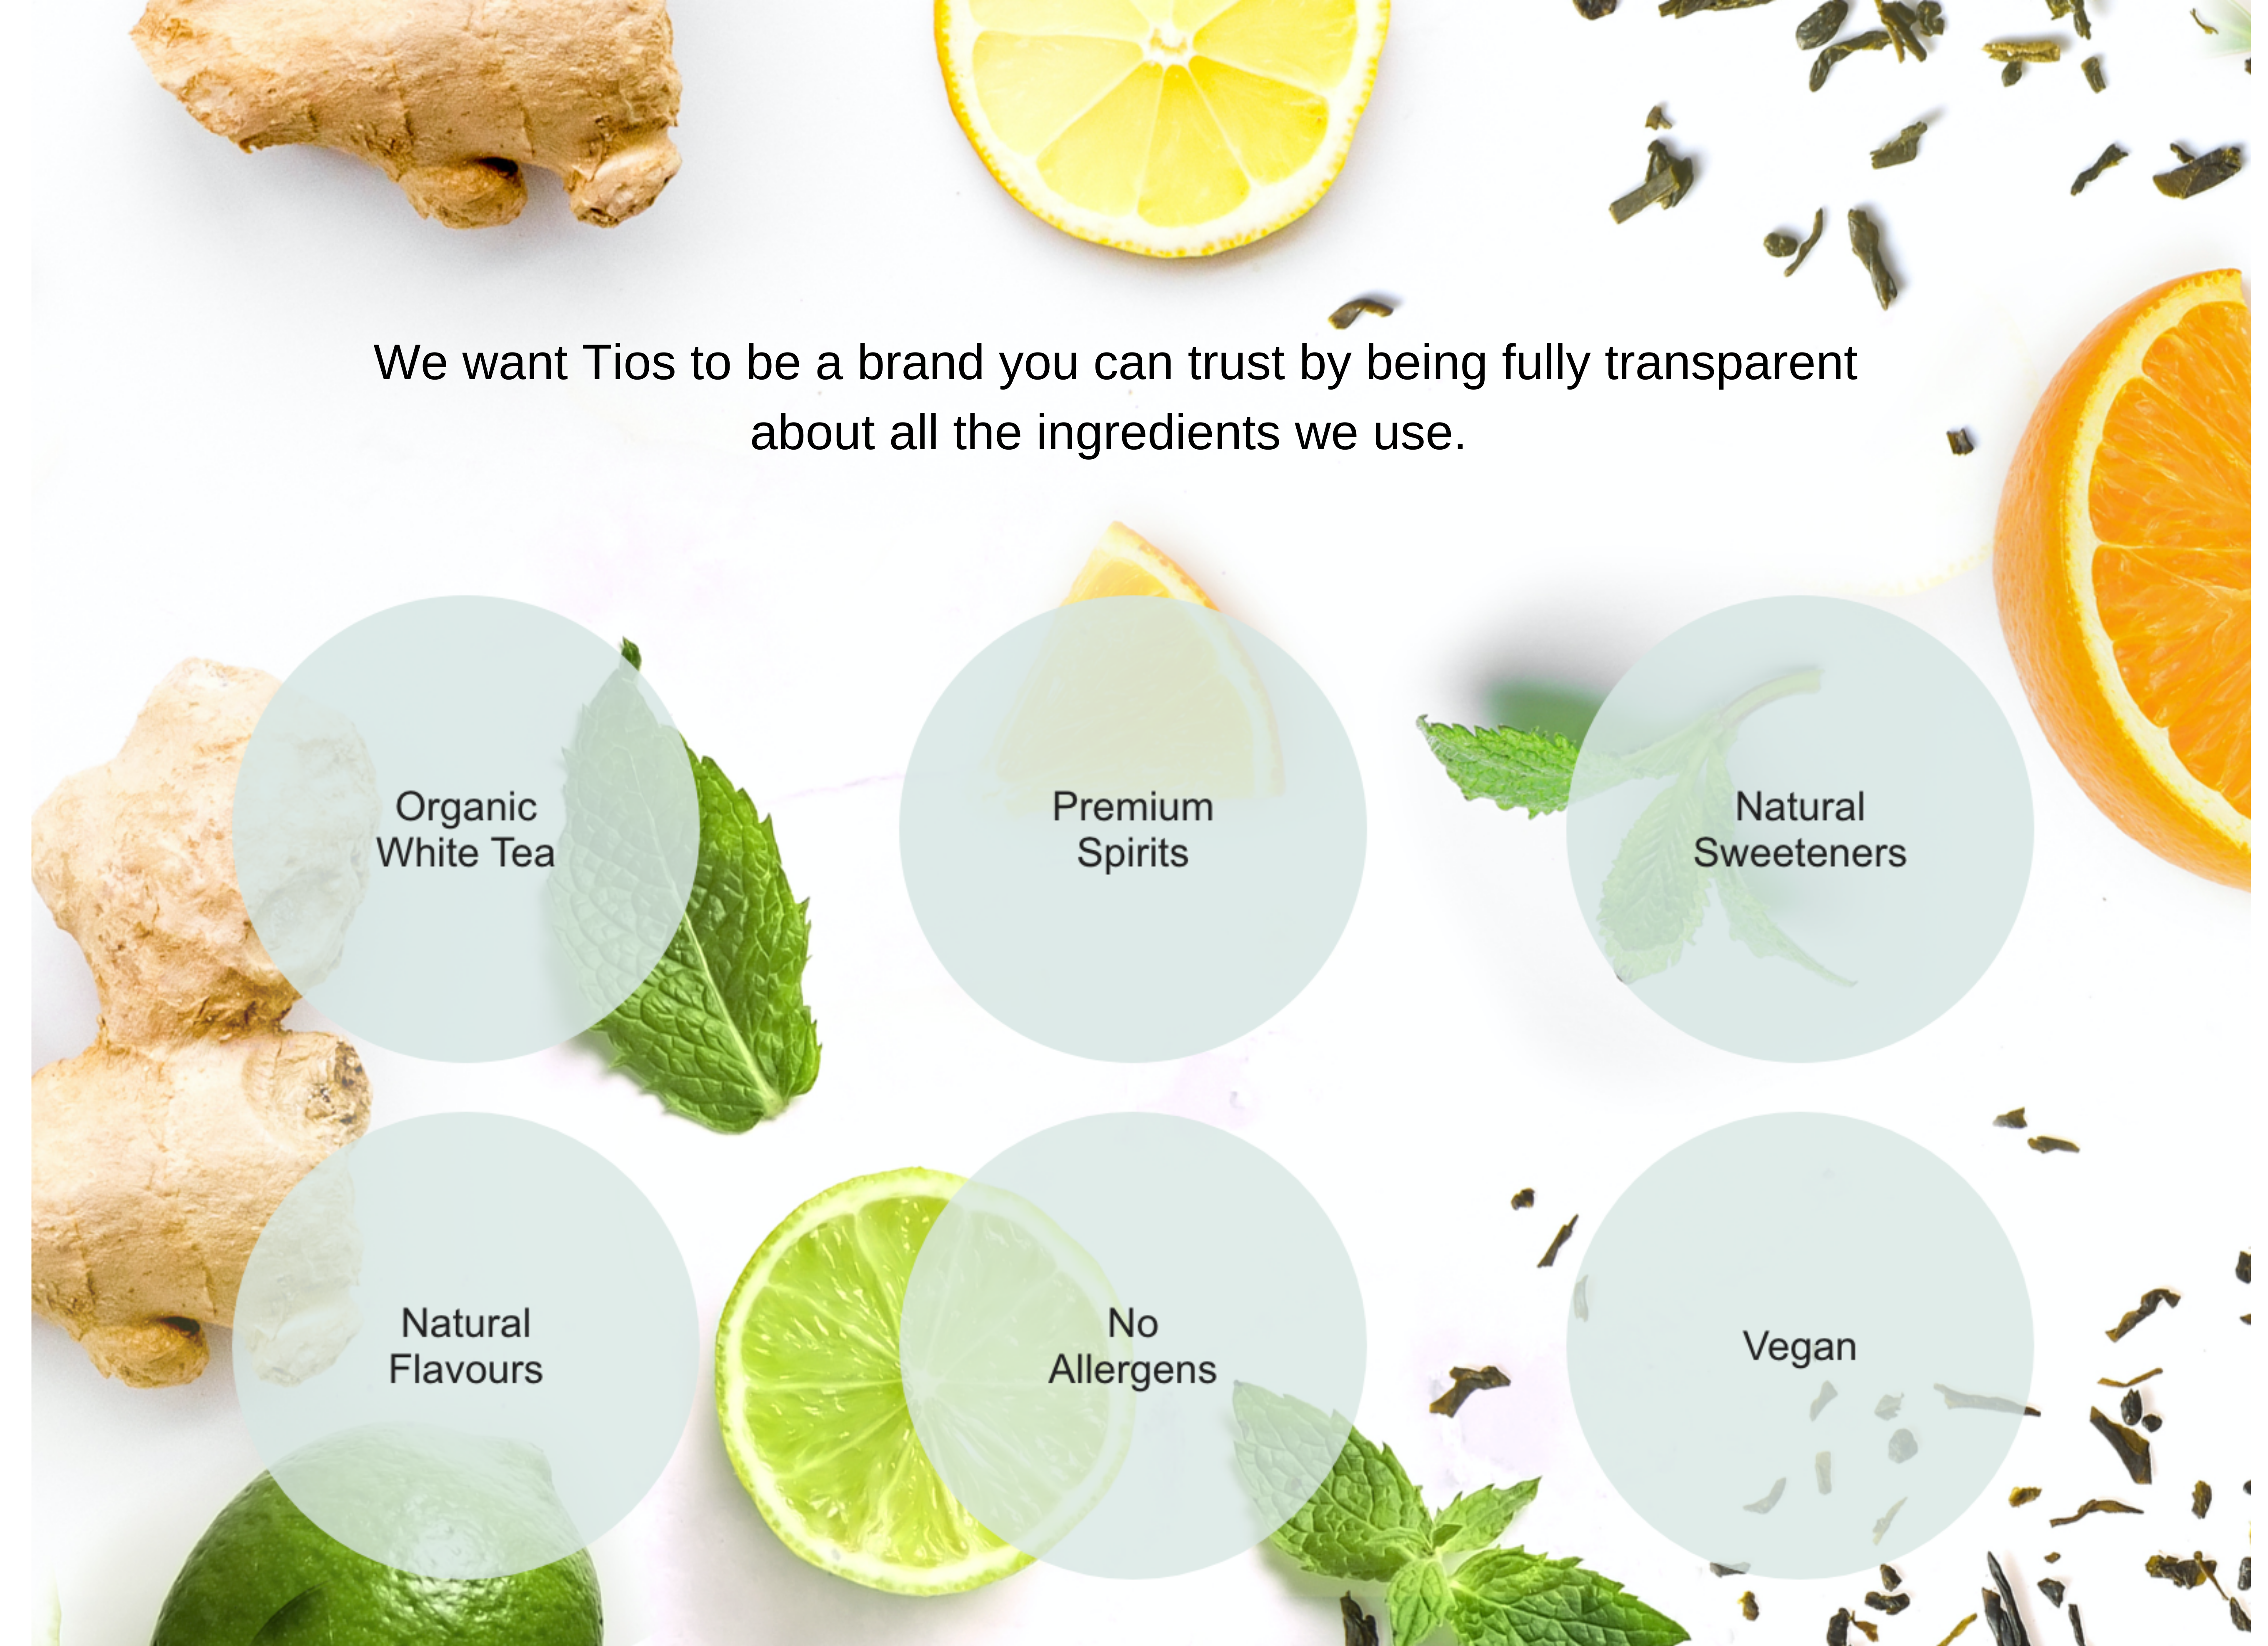 Description of our products including information such as organic white tea, premium spiritis, natural sweeteners, natural flavours, no allergens and Vegan. 